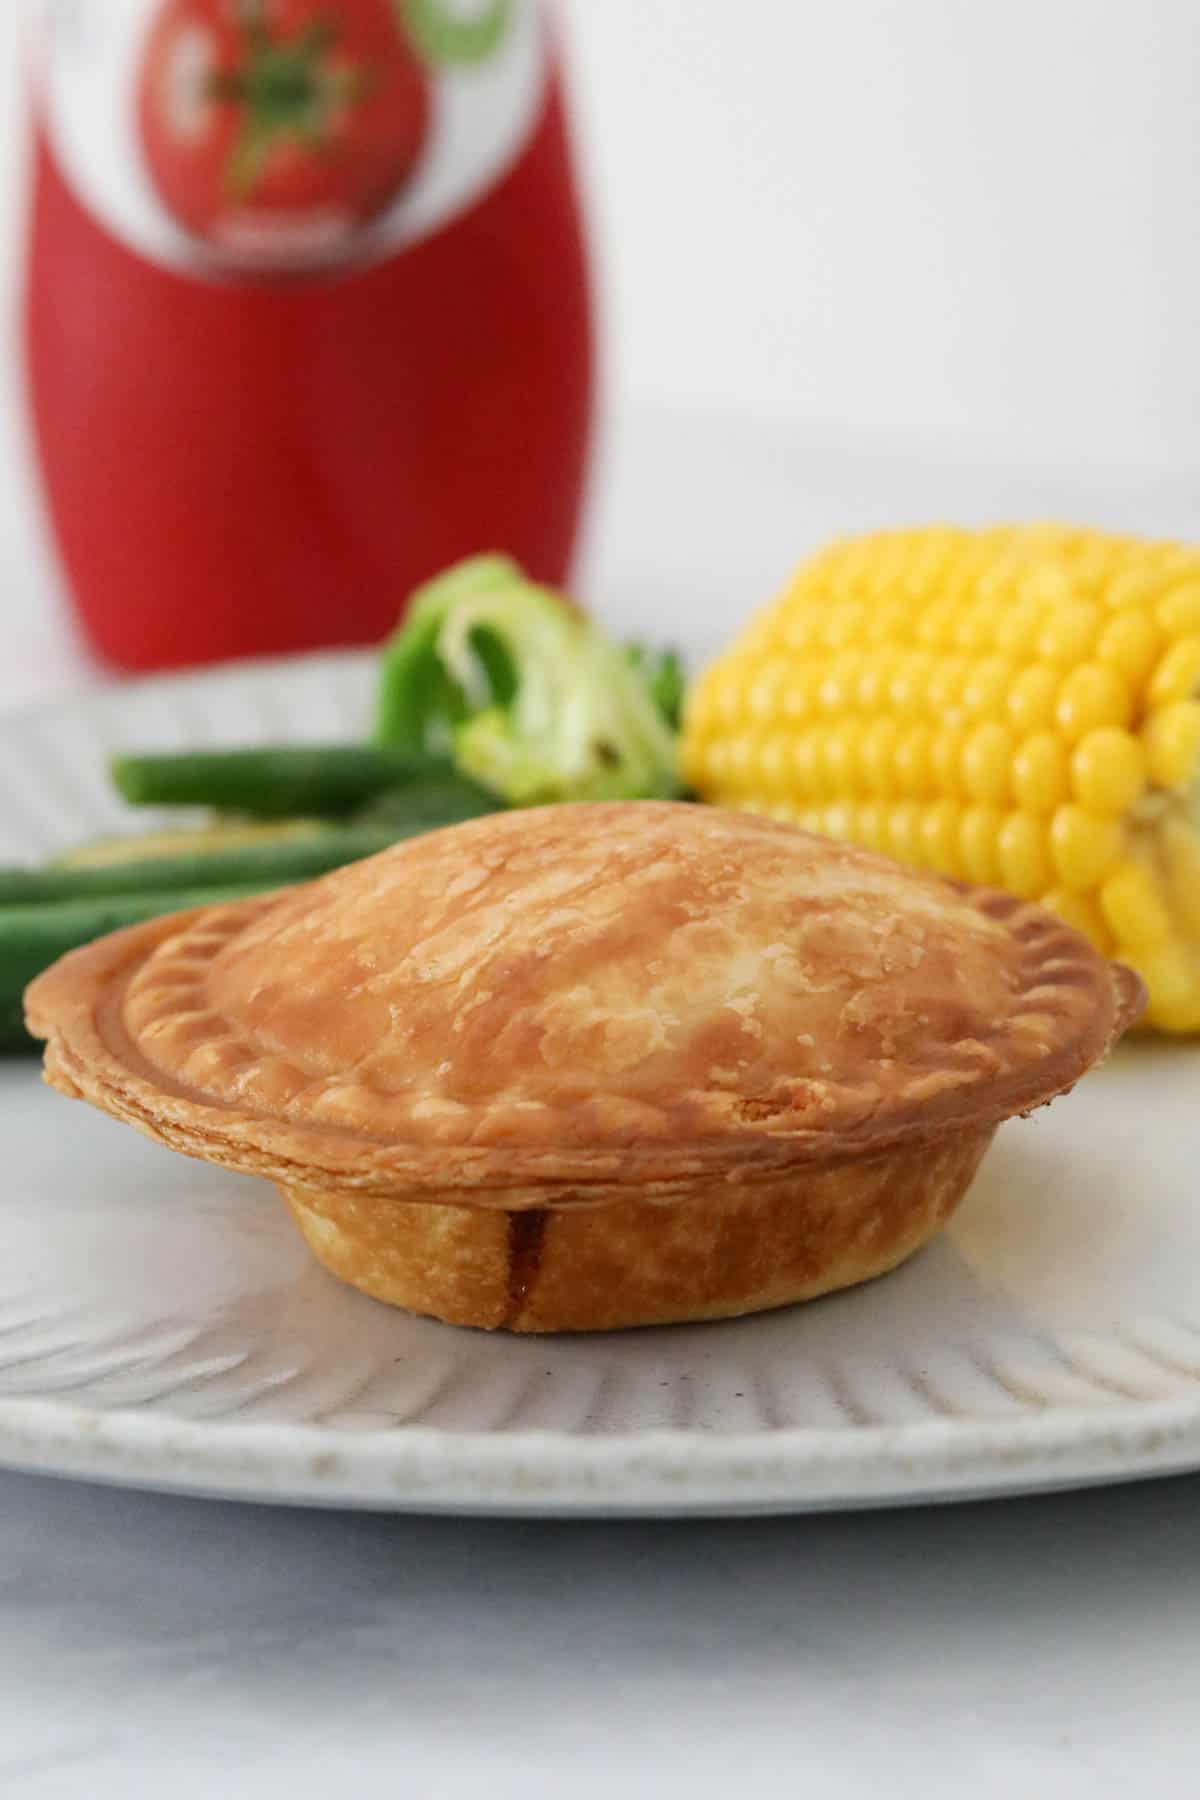 A pie cooked in a pie maker.